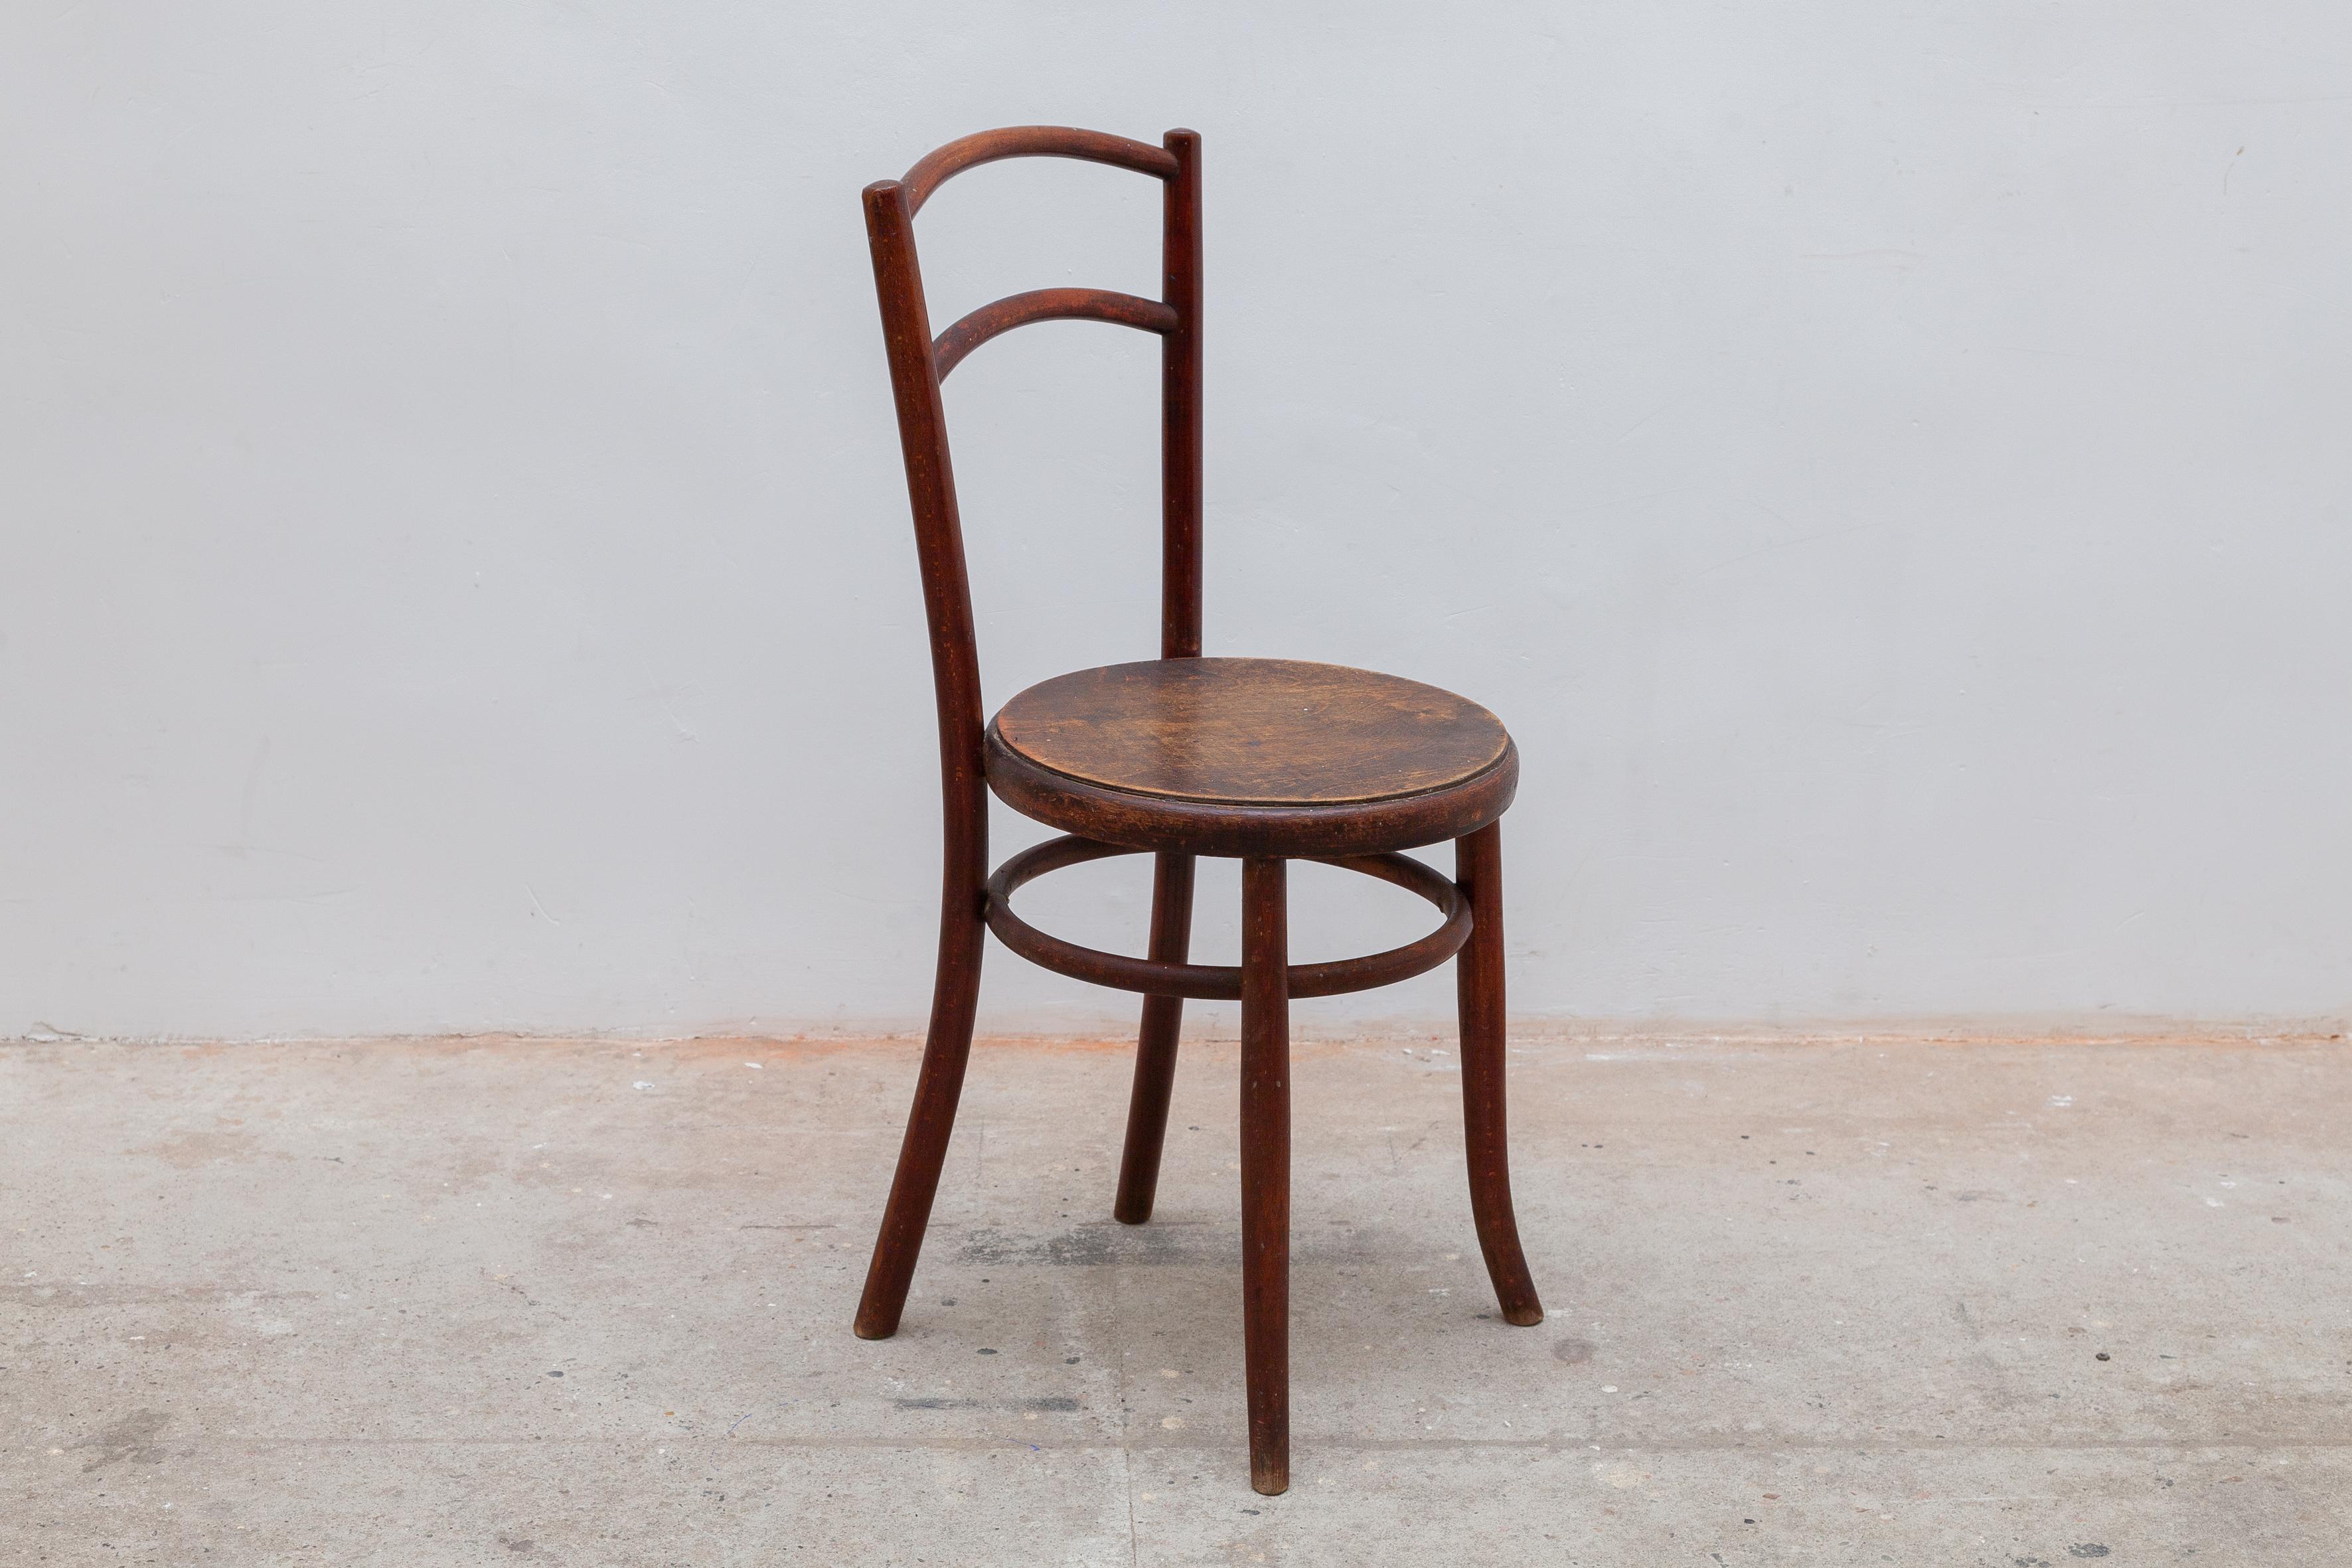 Classic collectible Art Nouveau chair by Fishel. Bentwood frame with hooped legs. In good condition with a nice patina.